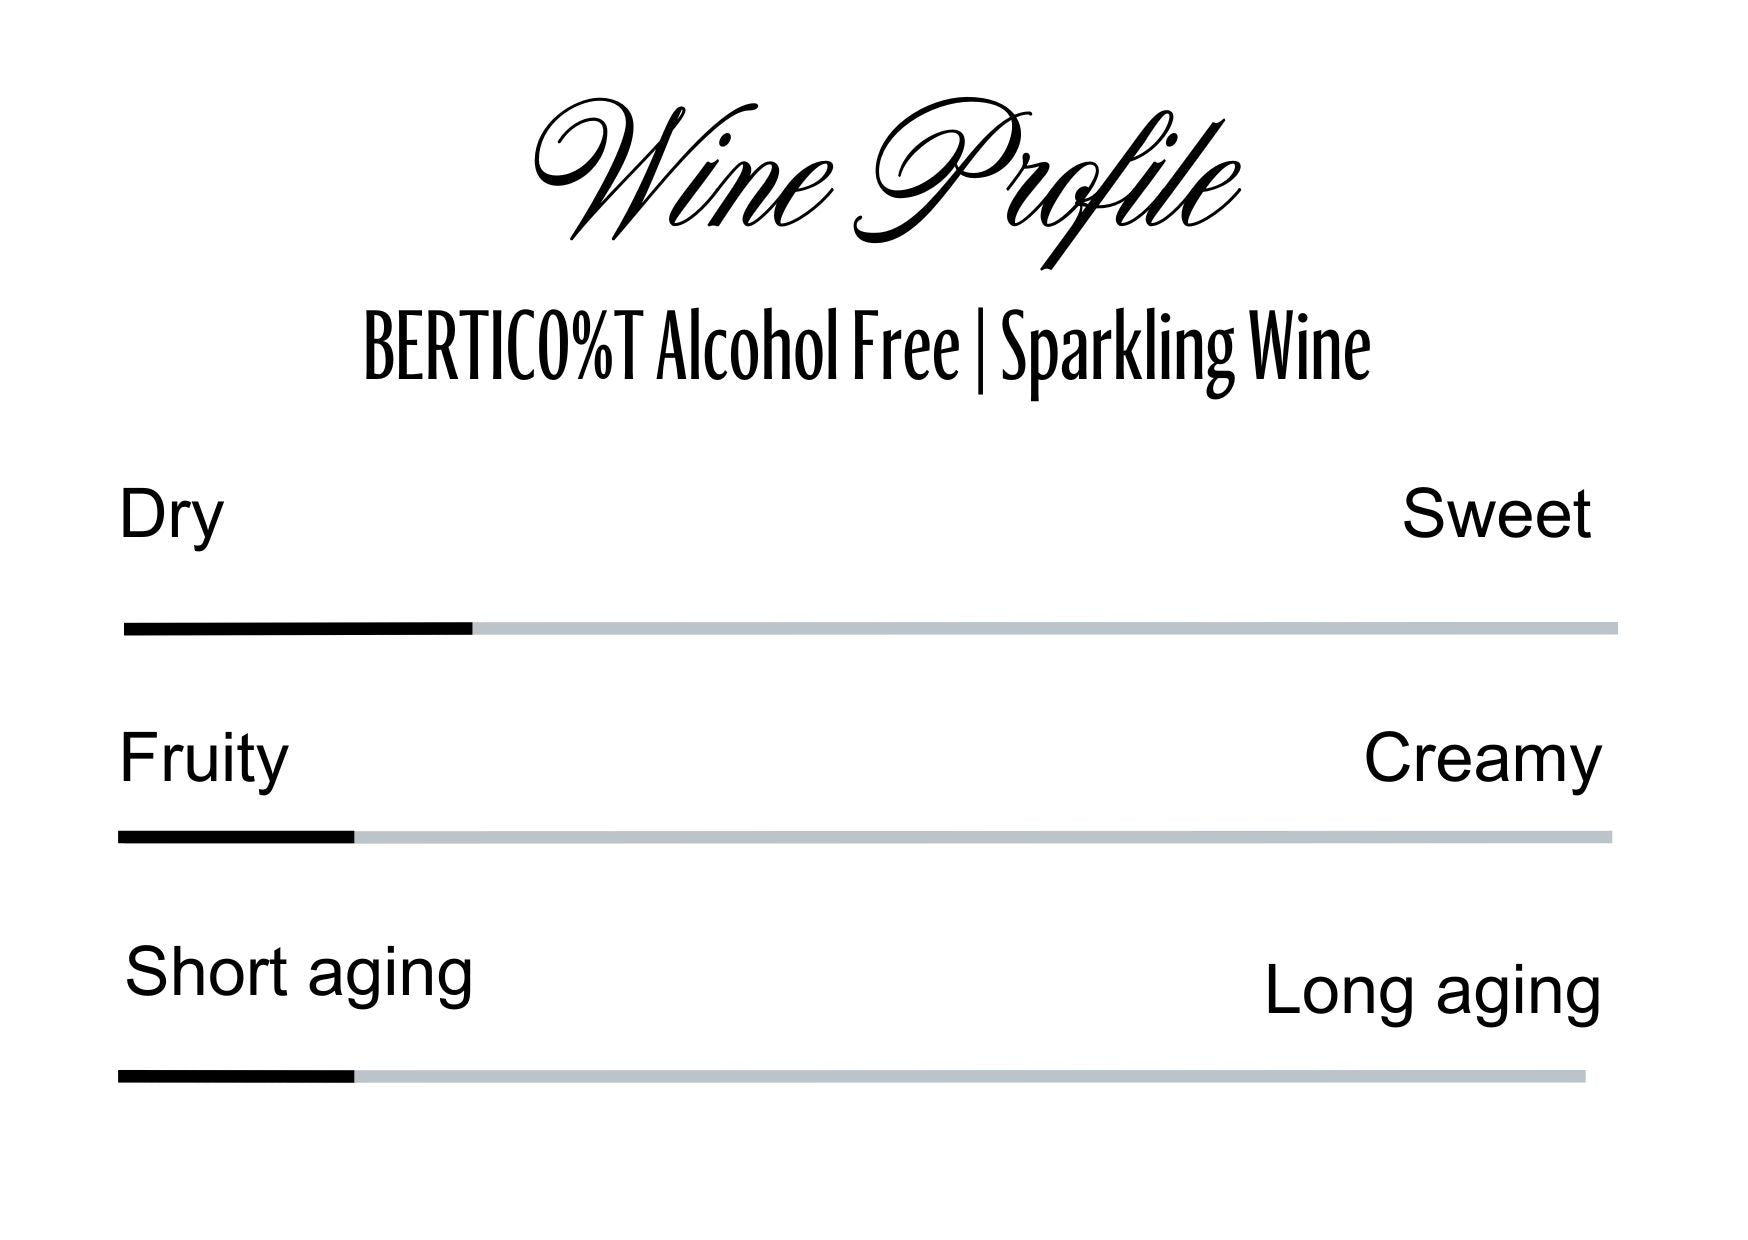 Wine Profle Review